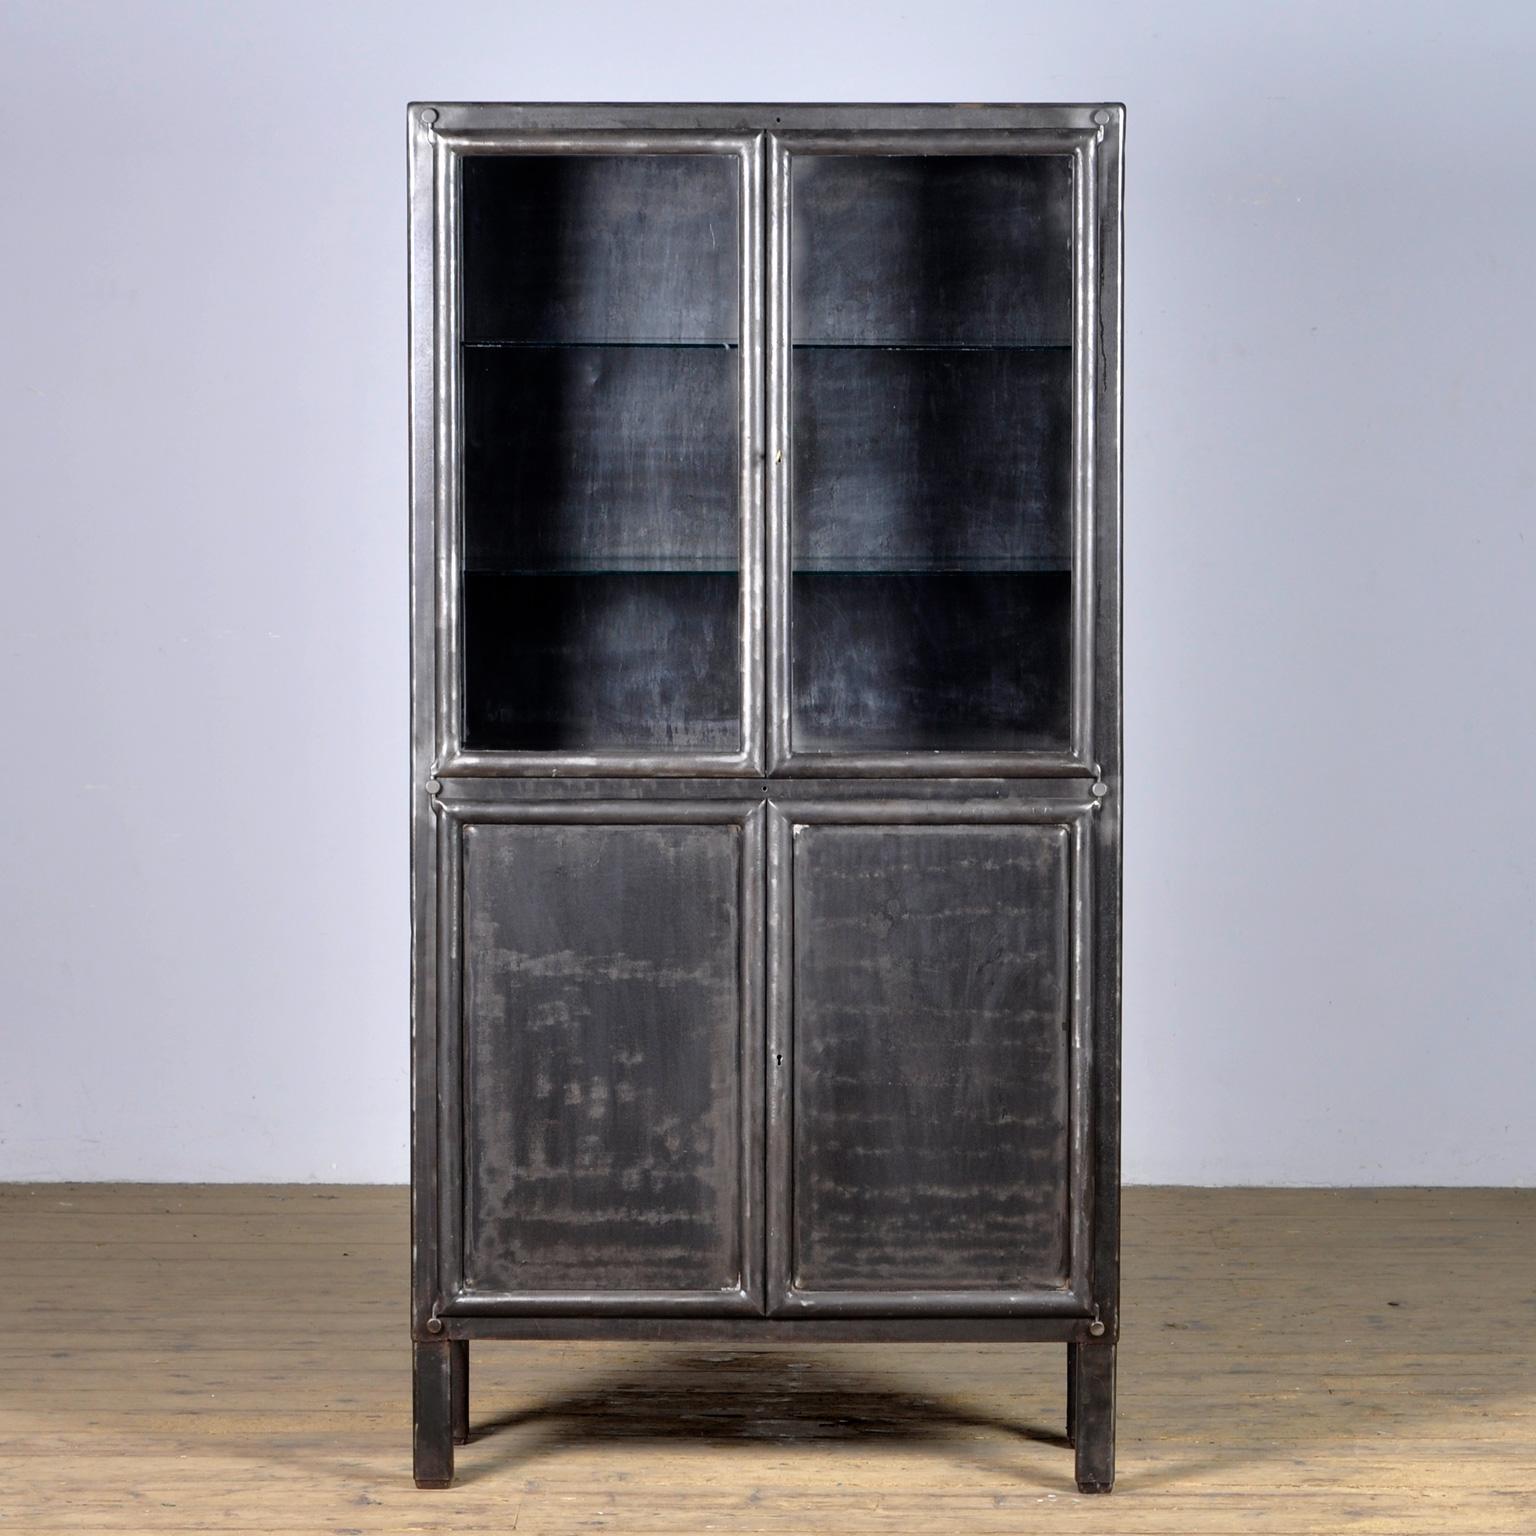 Medical cabinet from czechoslovakia, produced by kovona circa 1950. With two adjustable shelves in the top part and one shelf in the lower part. The cabinet has been stripped from its paint to the metal.